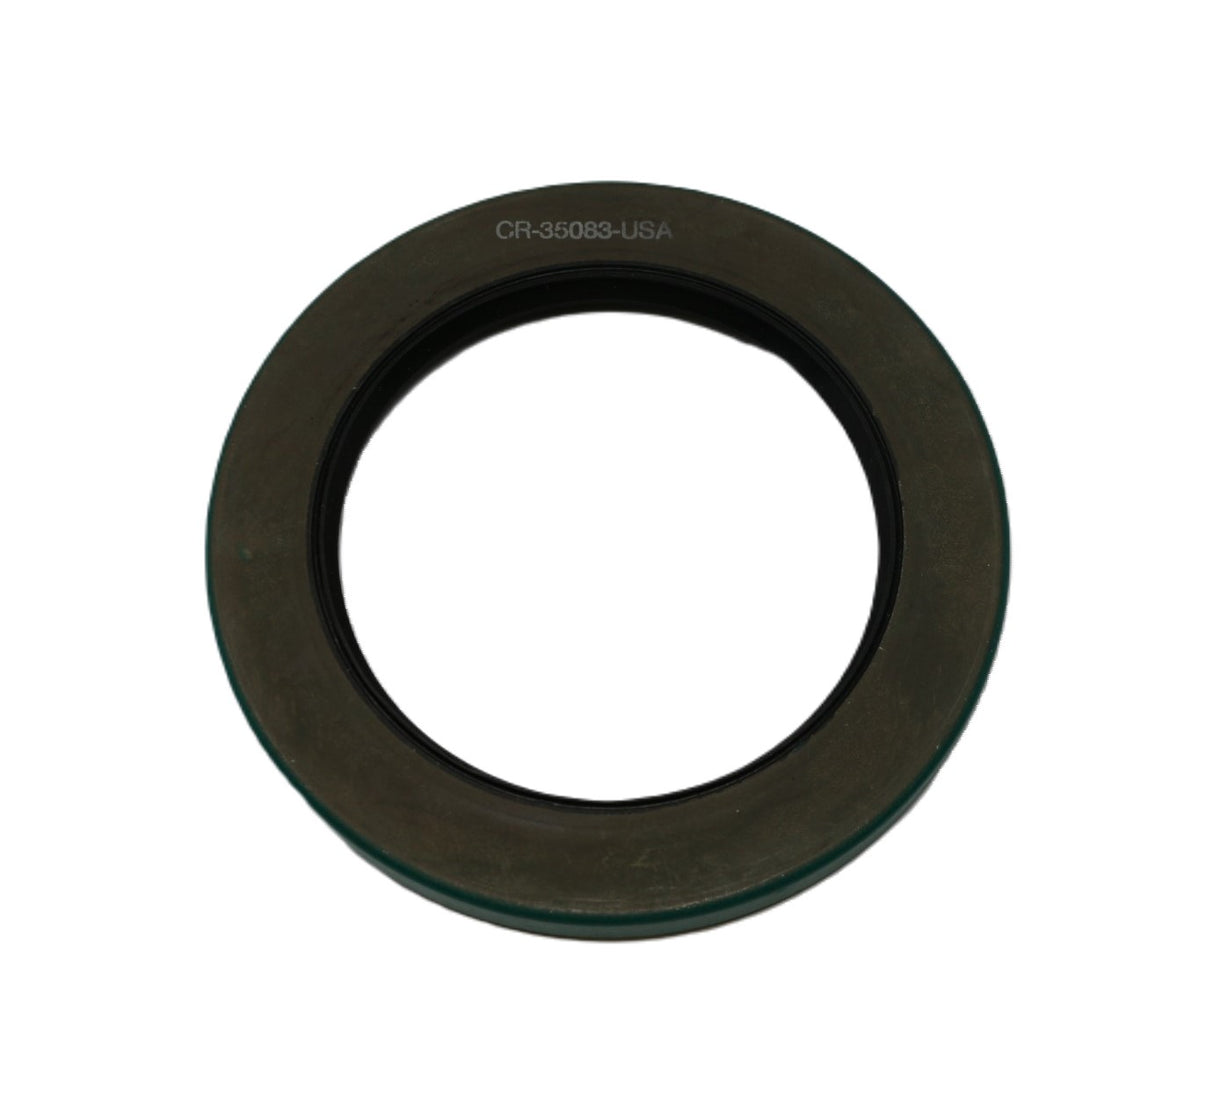 SKF - CHICAGO RAWHIDE / SCOTSEALS ­-­ 35083 ­-­ OIL SEAL 3.5in ID